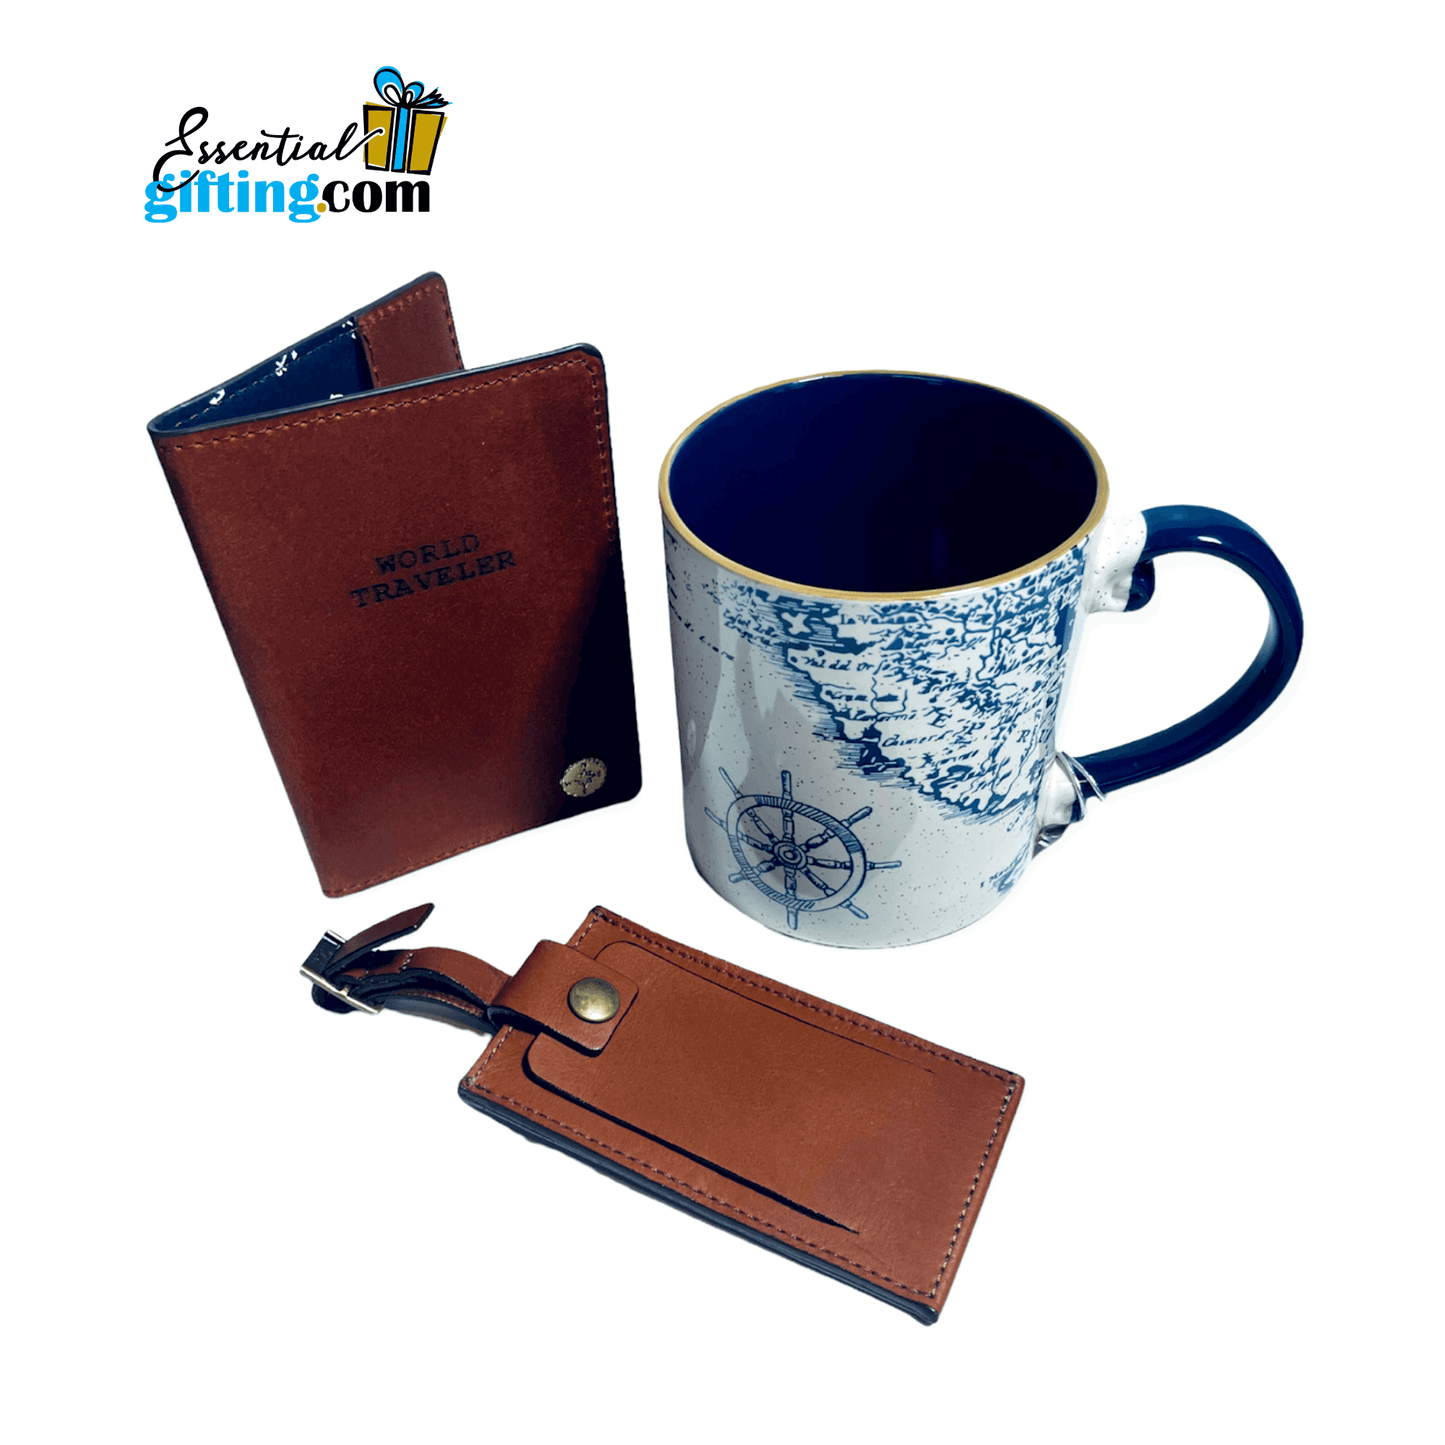 Stylish men's accessories: Nautical-themed coffee mug, leather passport holder, and luggage tag. A versatile gift set for the modern traveler.